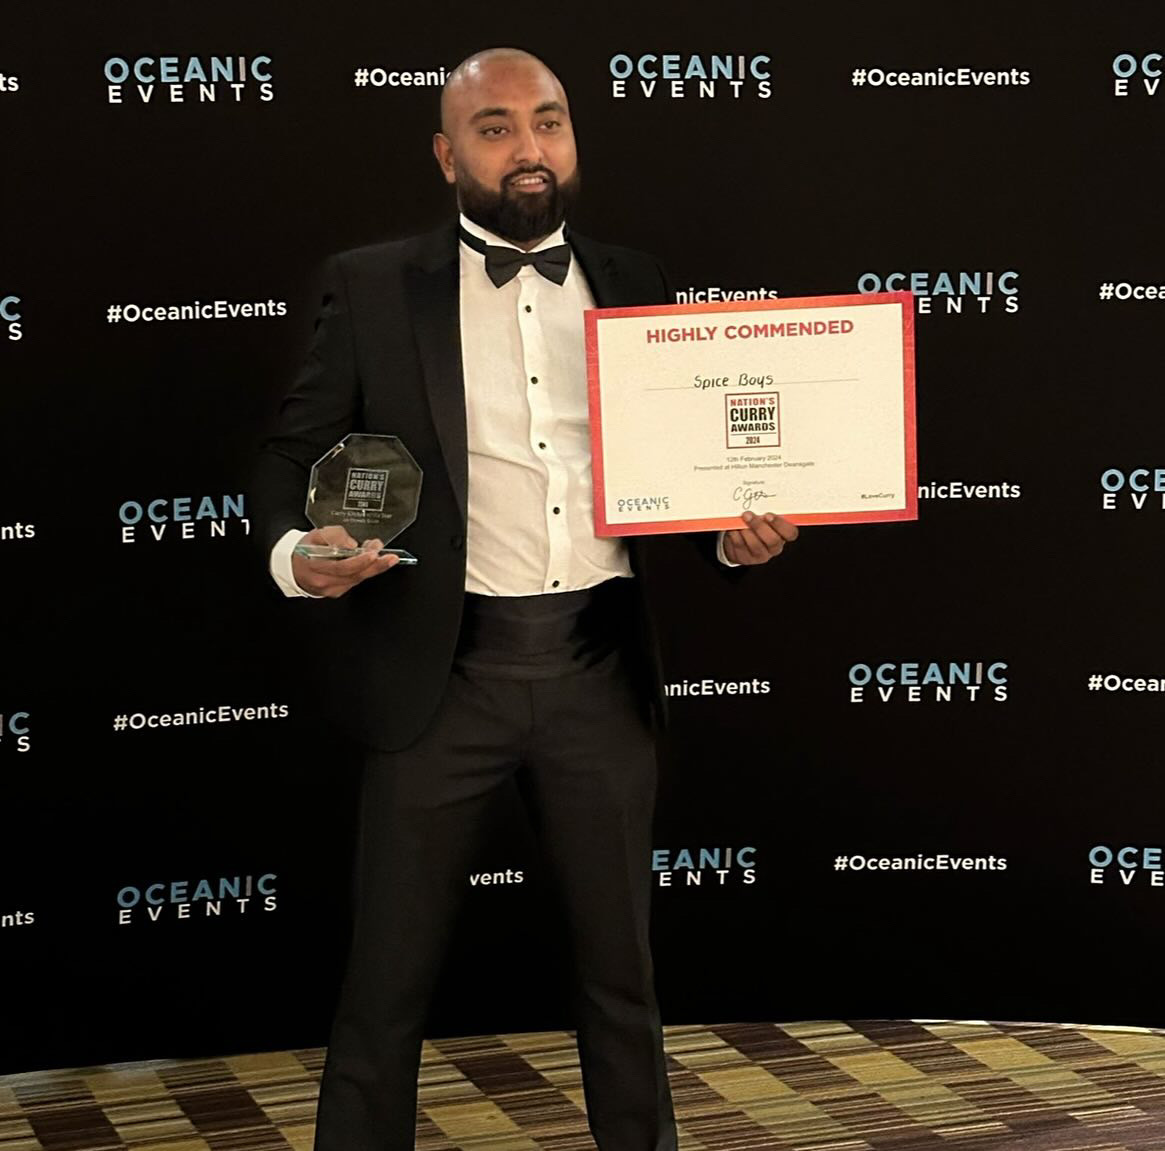 Congratulations to Spice Boys who won at the Nation's Curry Awards 2024!! 🌶️ We are so proud of our local Harlow businesses making waves in their industries. Keep up the good work! #Harlow #HarlowTownCentre #NationsCurryAwards #SpiceBoys #Award